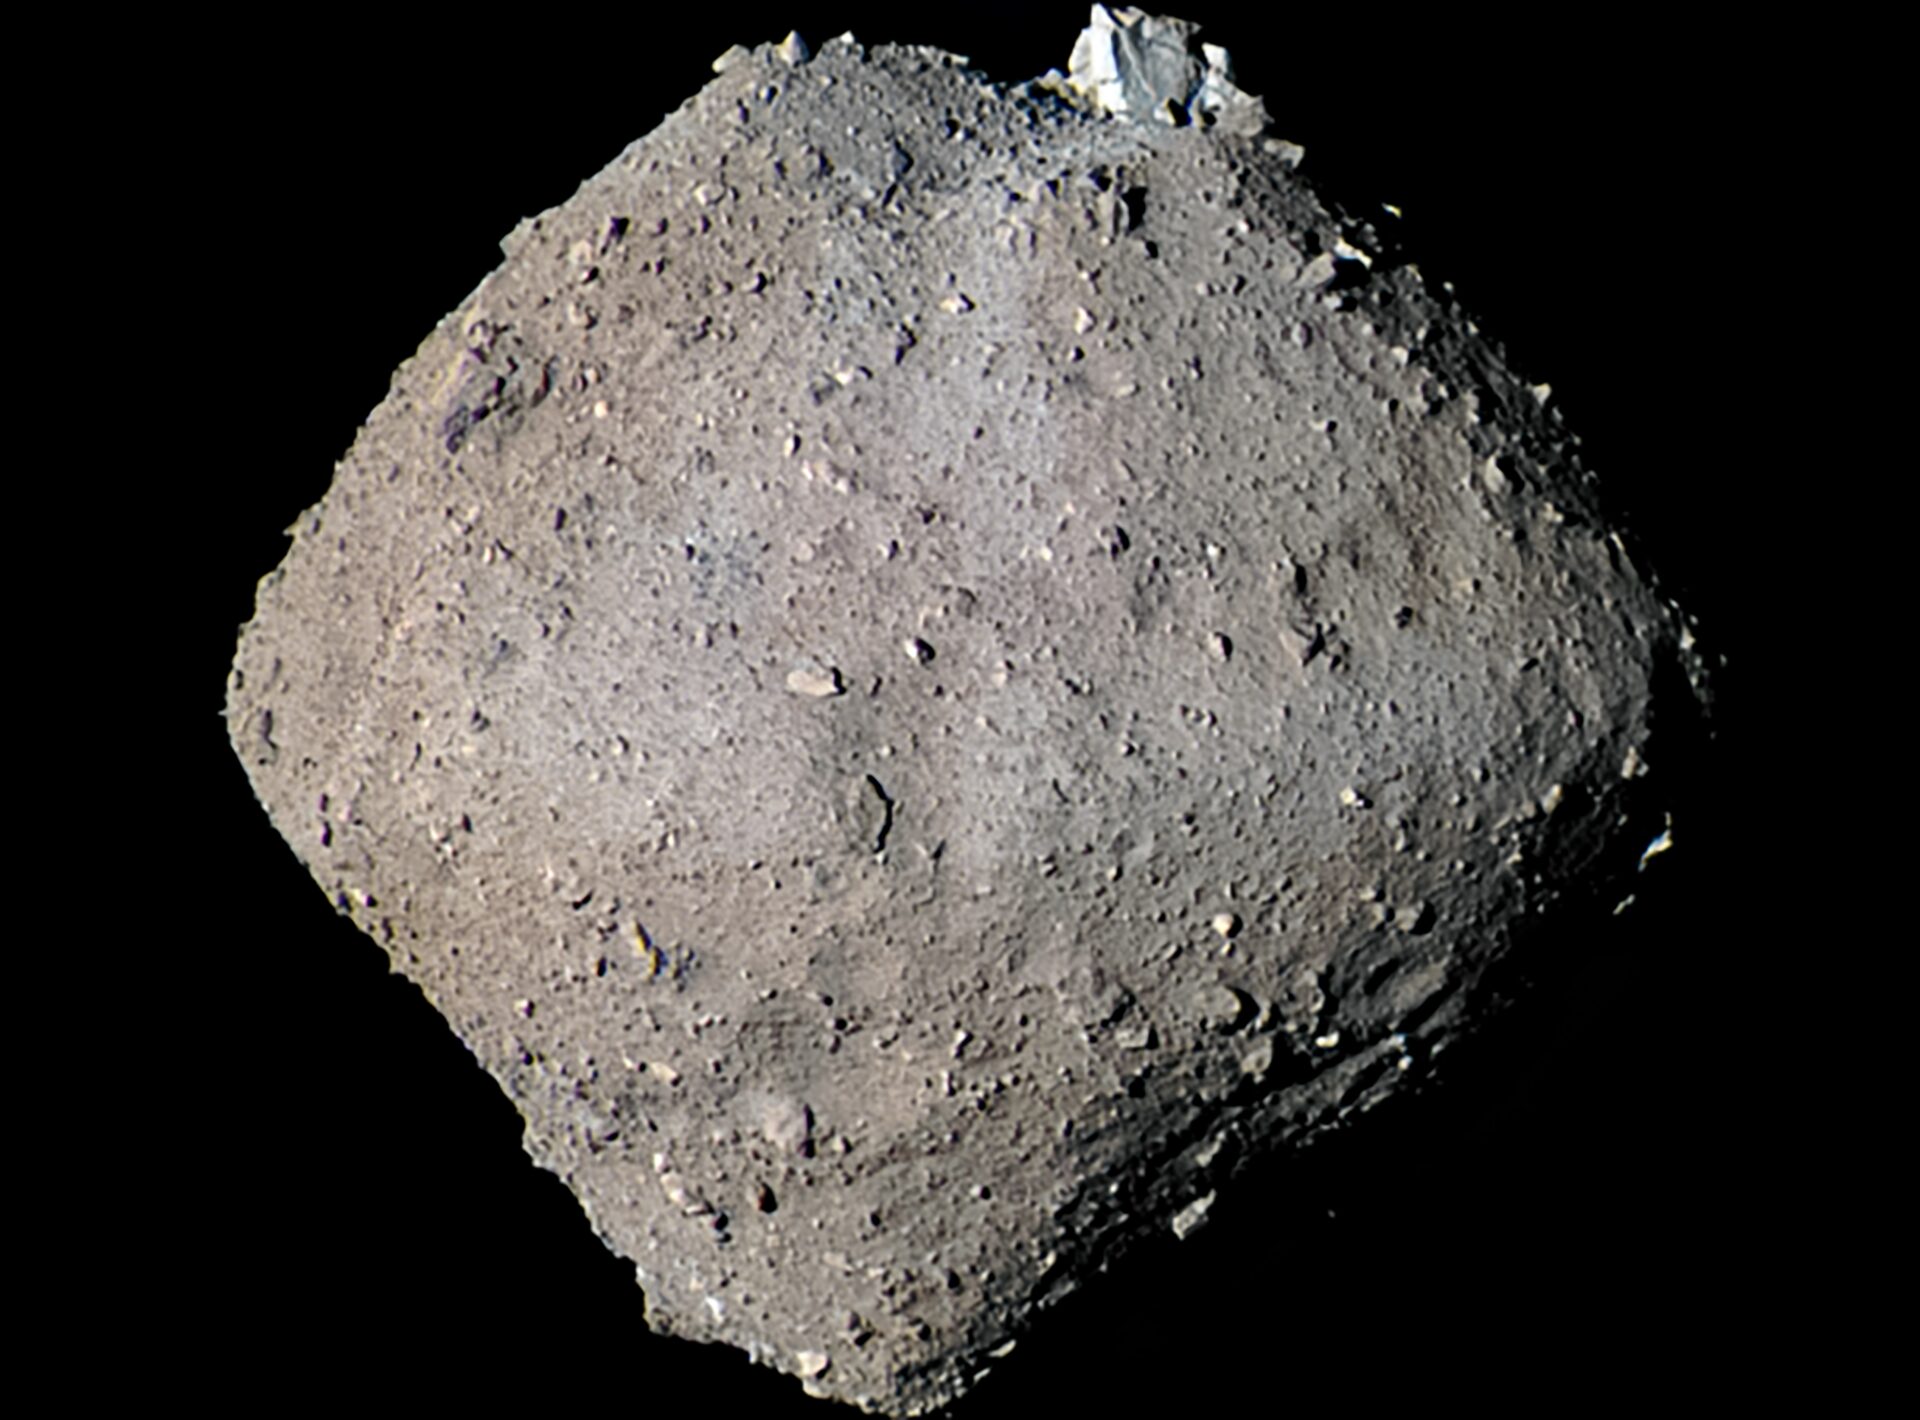 Image for Organic compounds in asteroids formed in colder regions of space: study